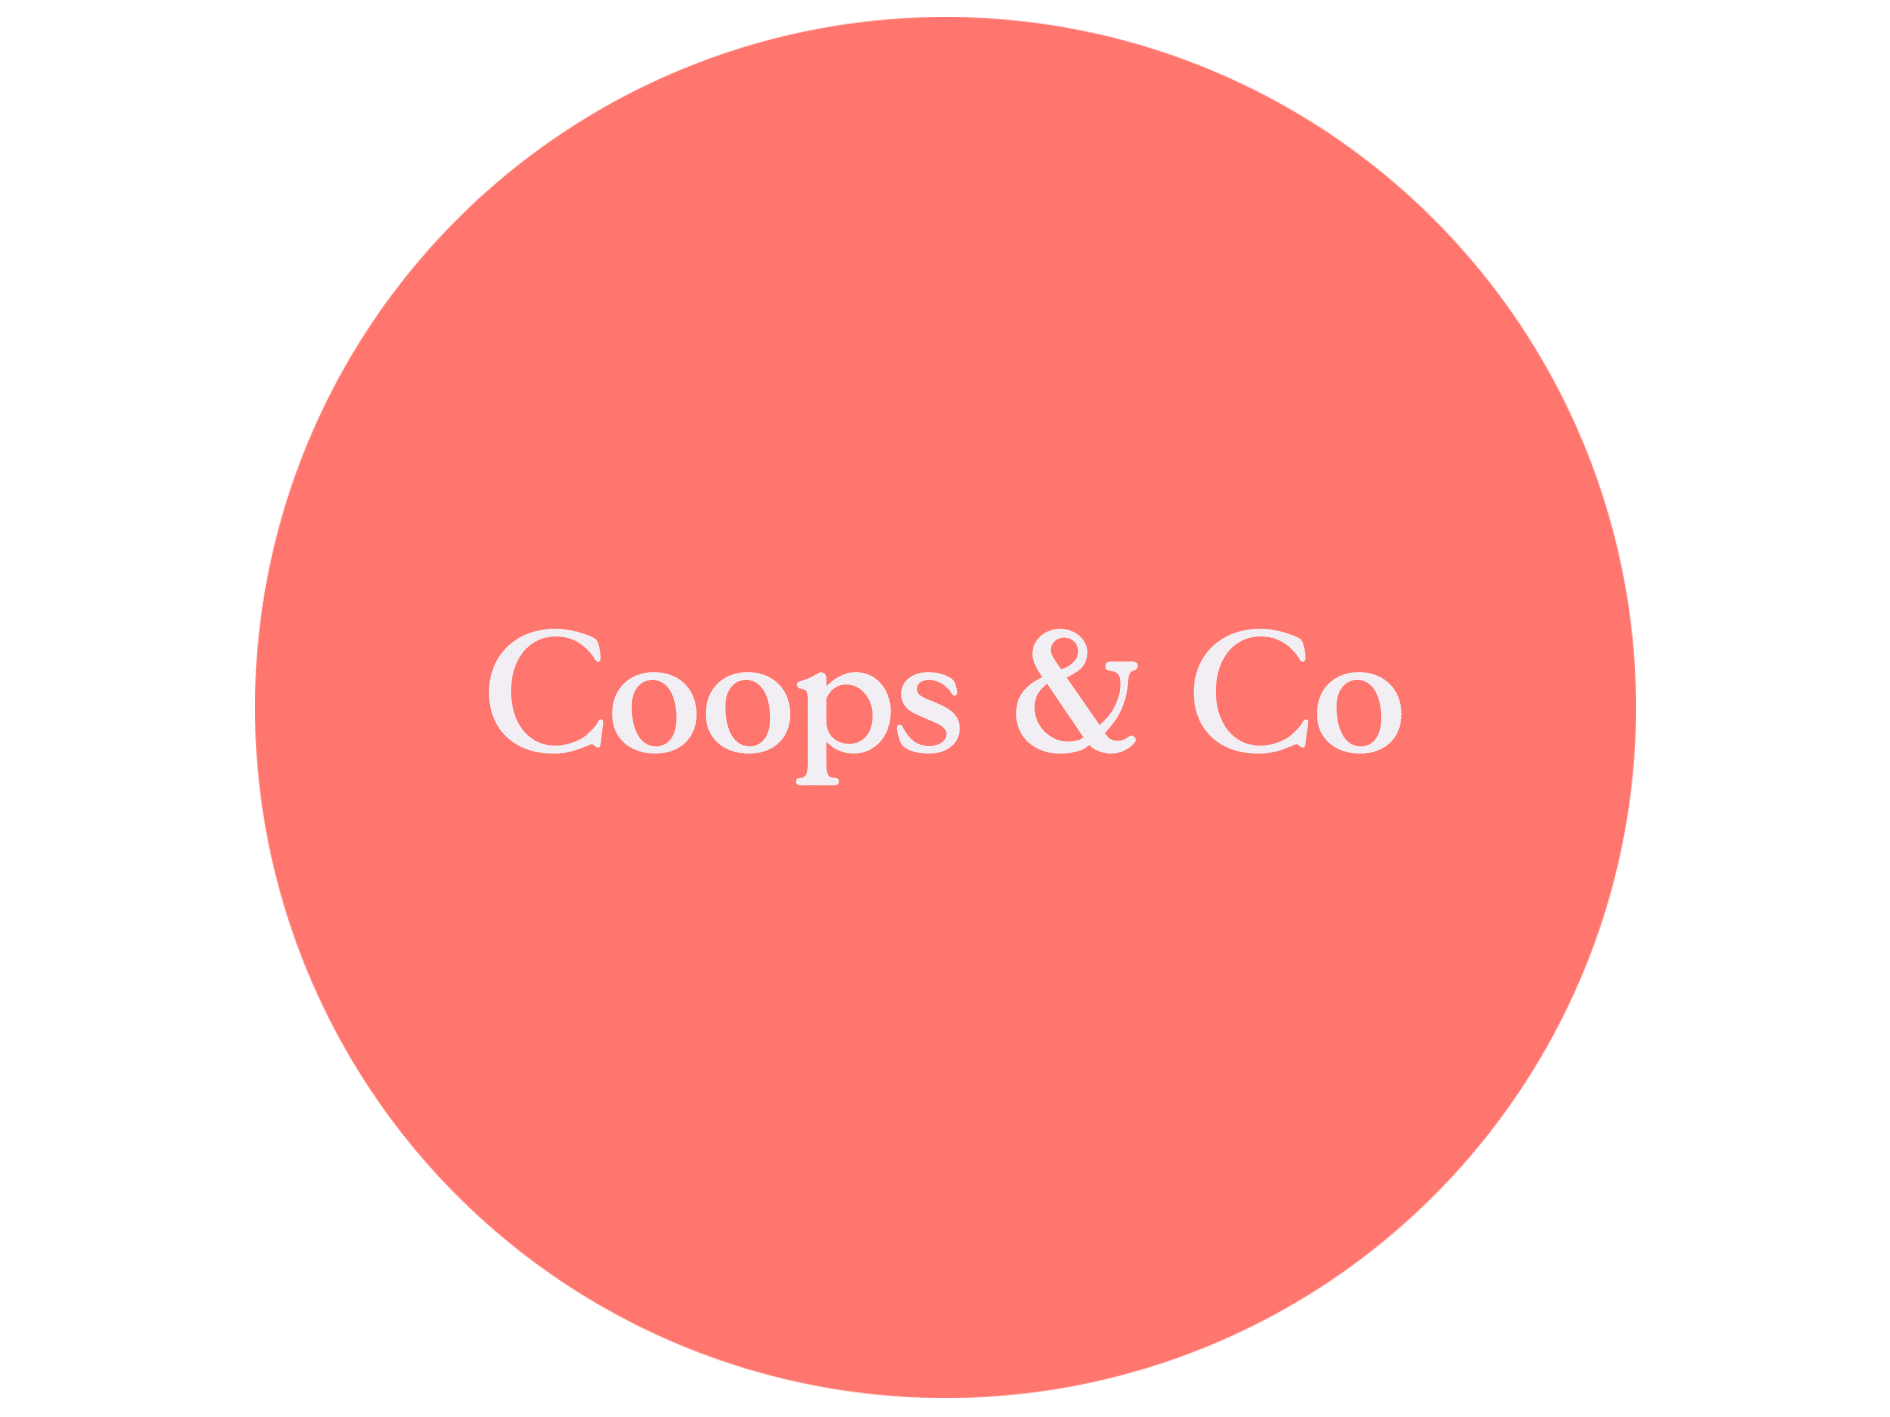 Logo: Coops & Co in white on a soft pink dics.